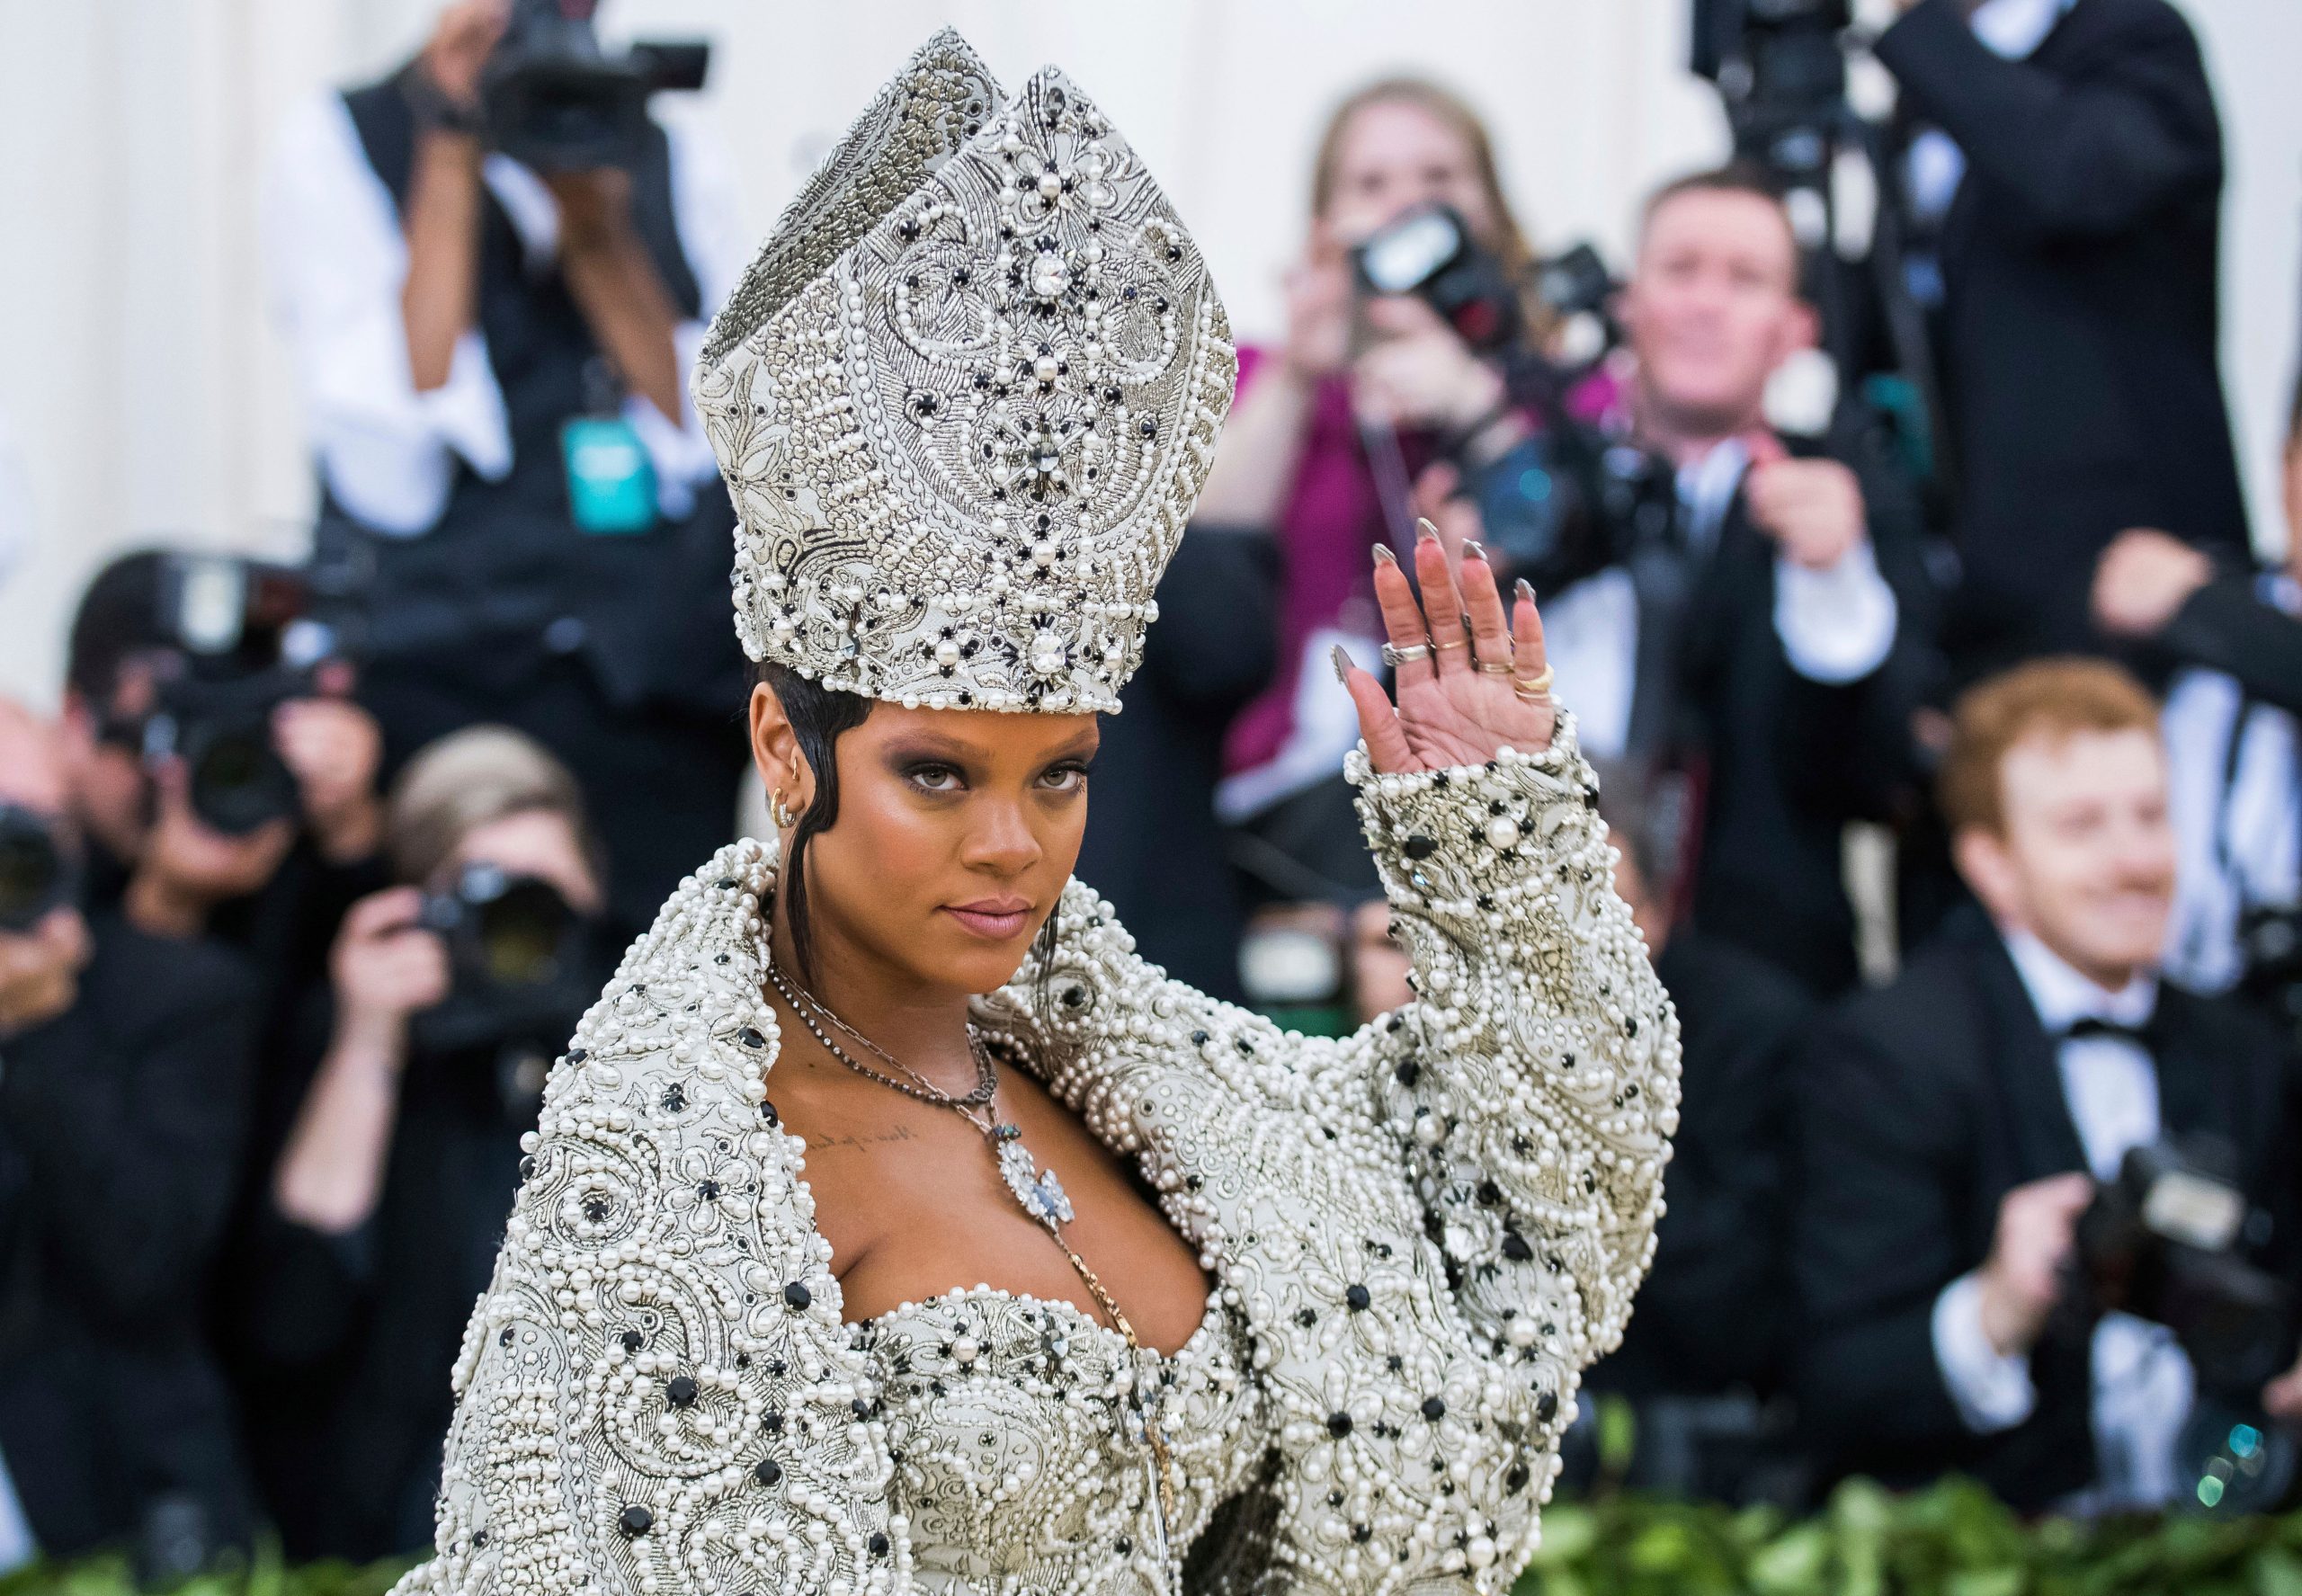 Met Gala 2022: Your guide to the star-studded event in NYC